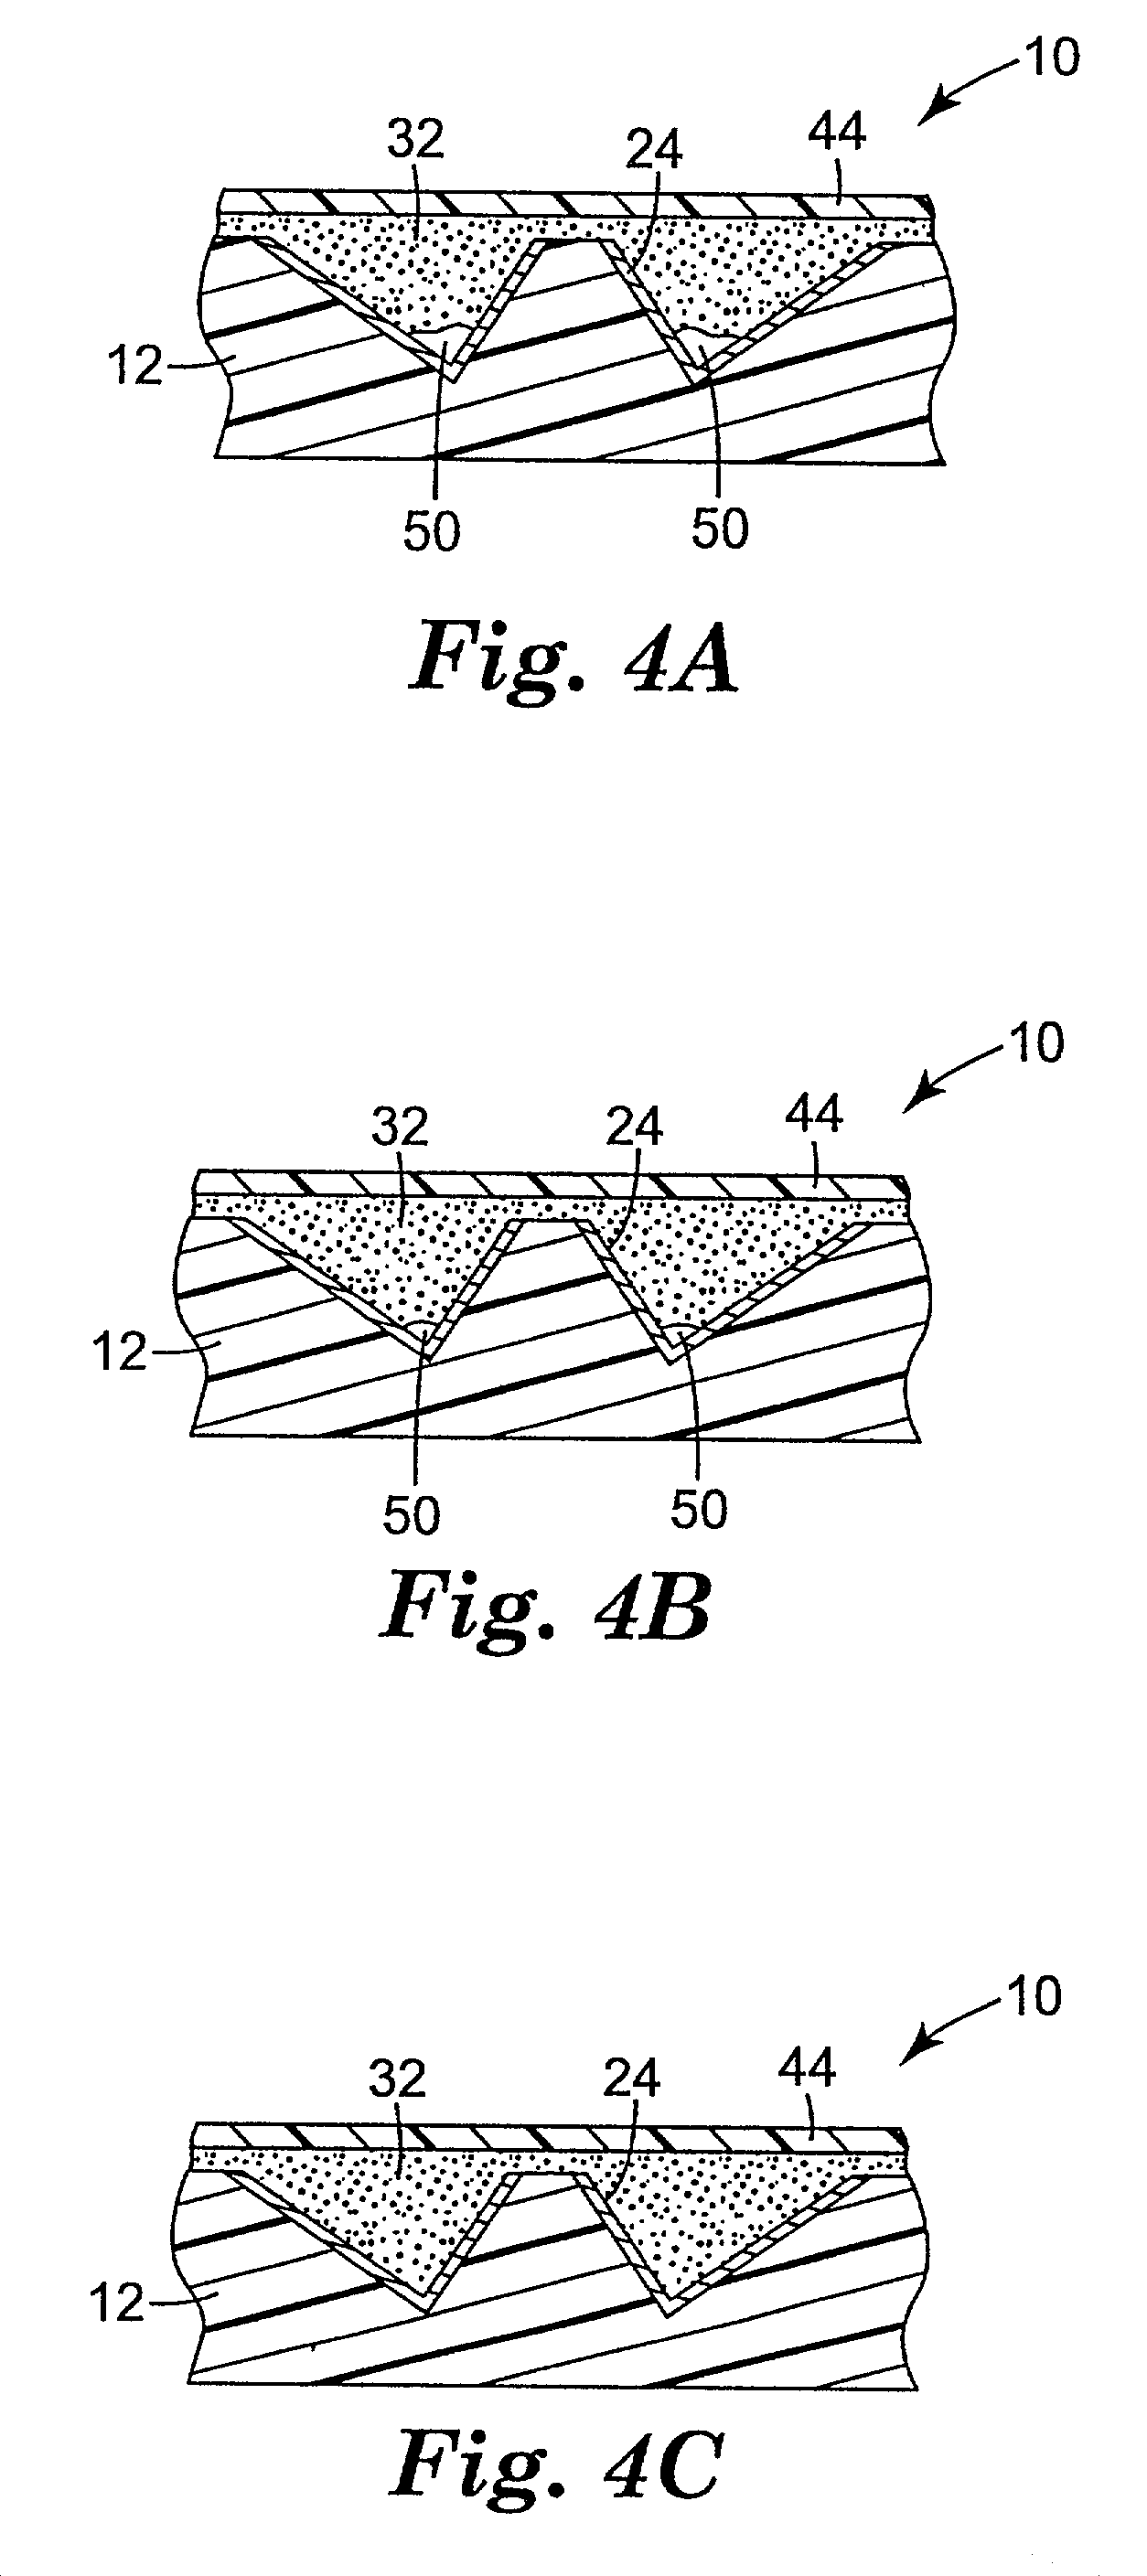 Cube corner cavity based retroreflectors with transparent fill material